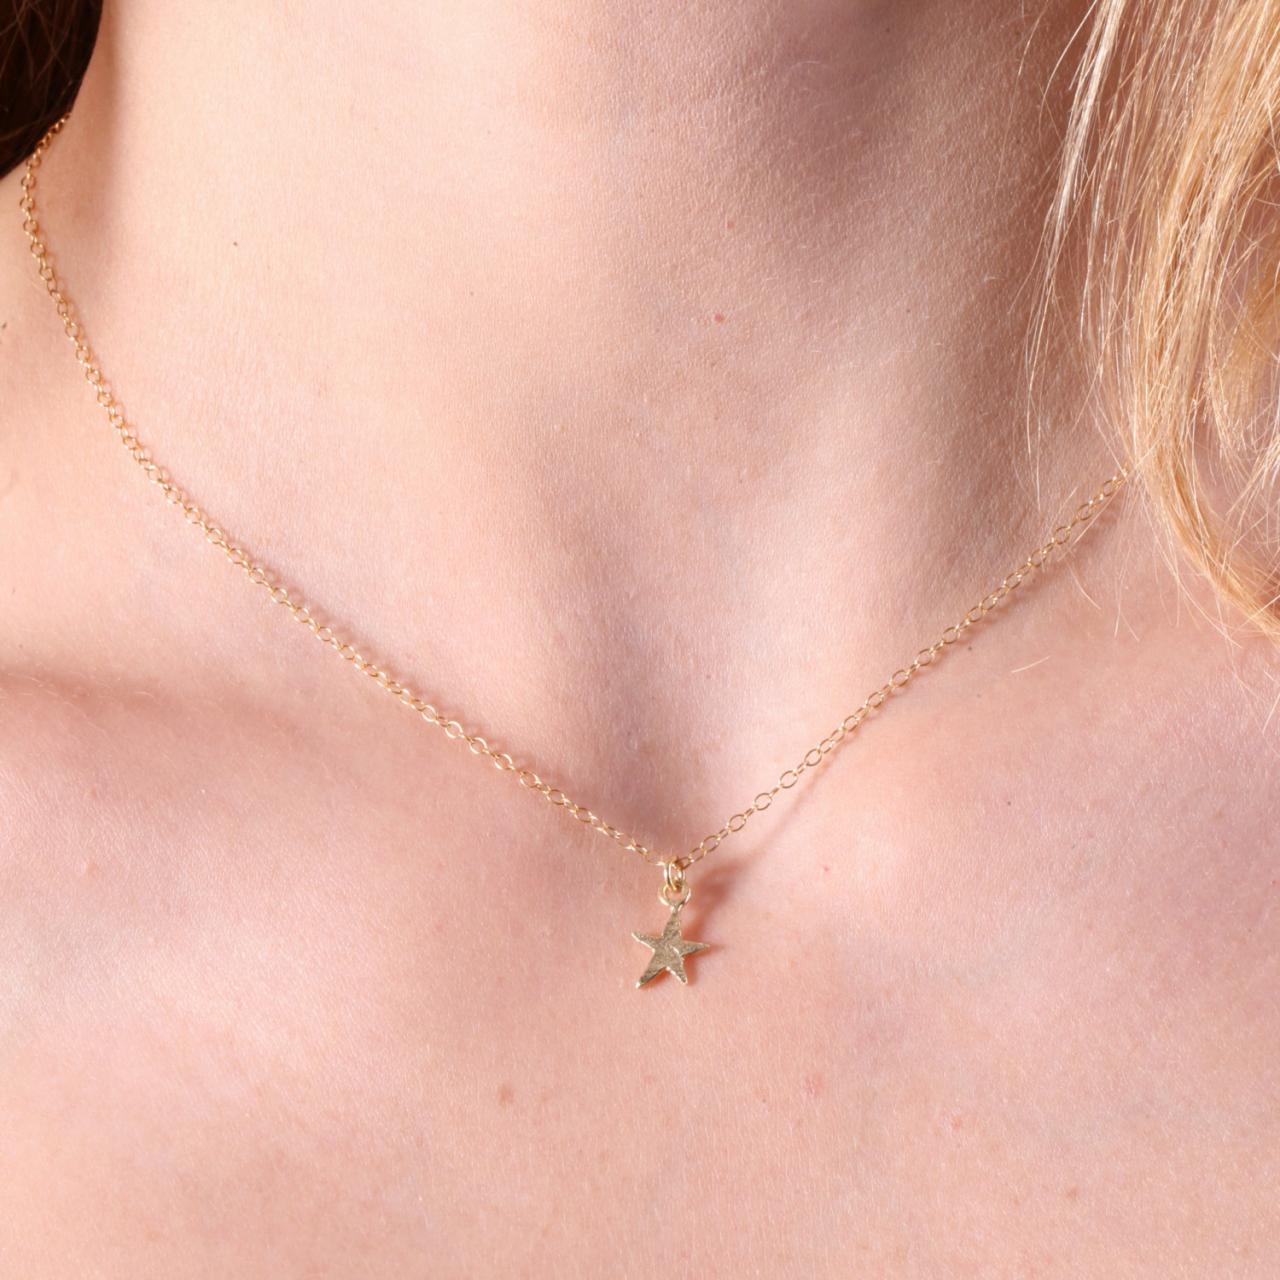 Gold Necklace, Gold Star Necklace, Tiny Star, Simple Necklace, Tiny Gold Necklace, Petite Jewelry D13